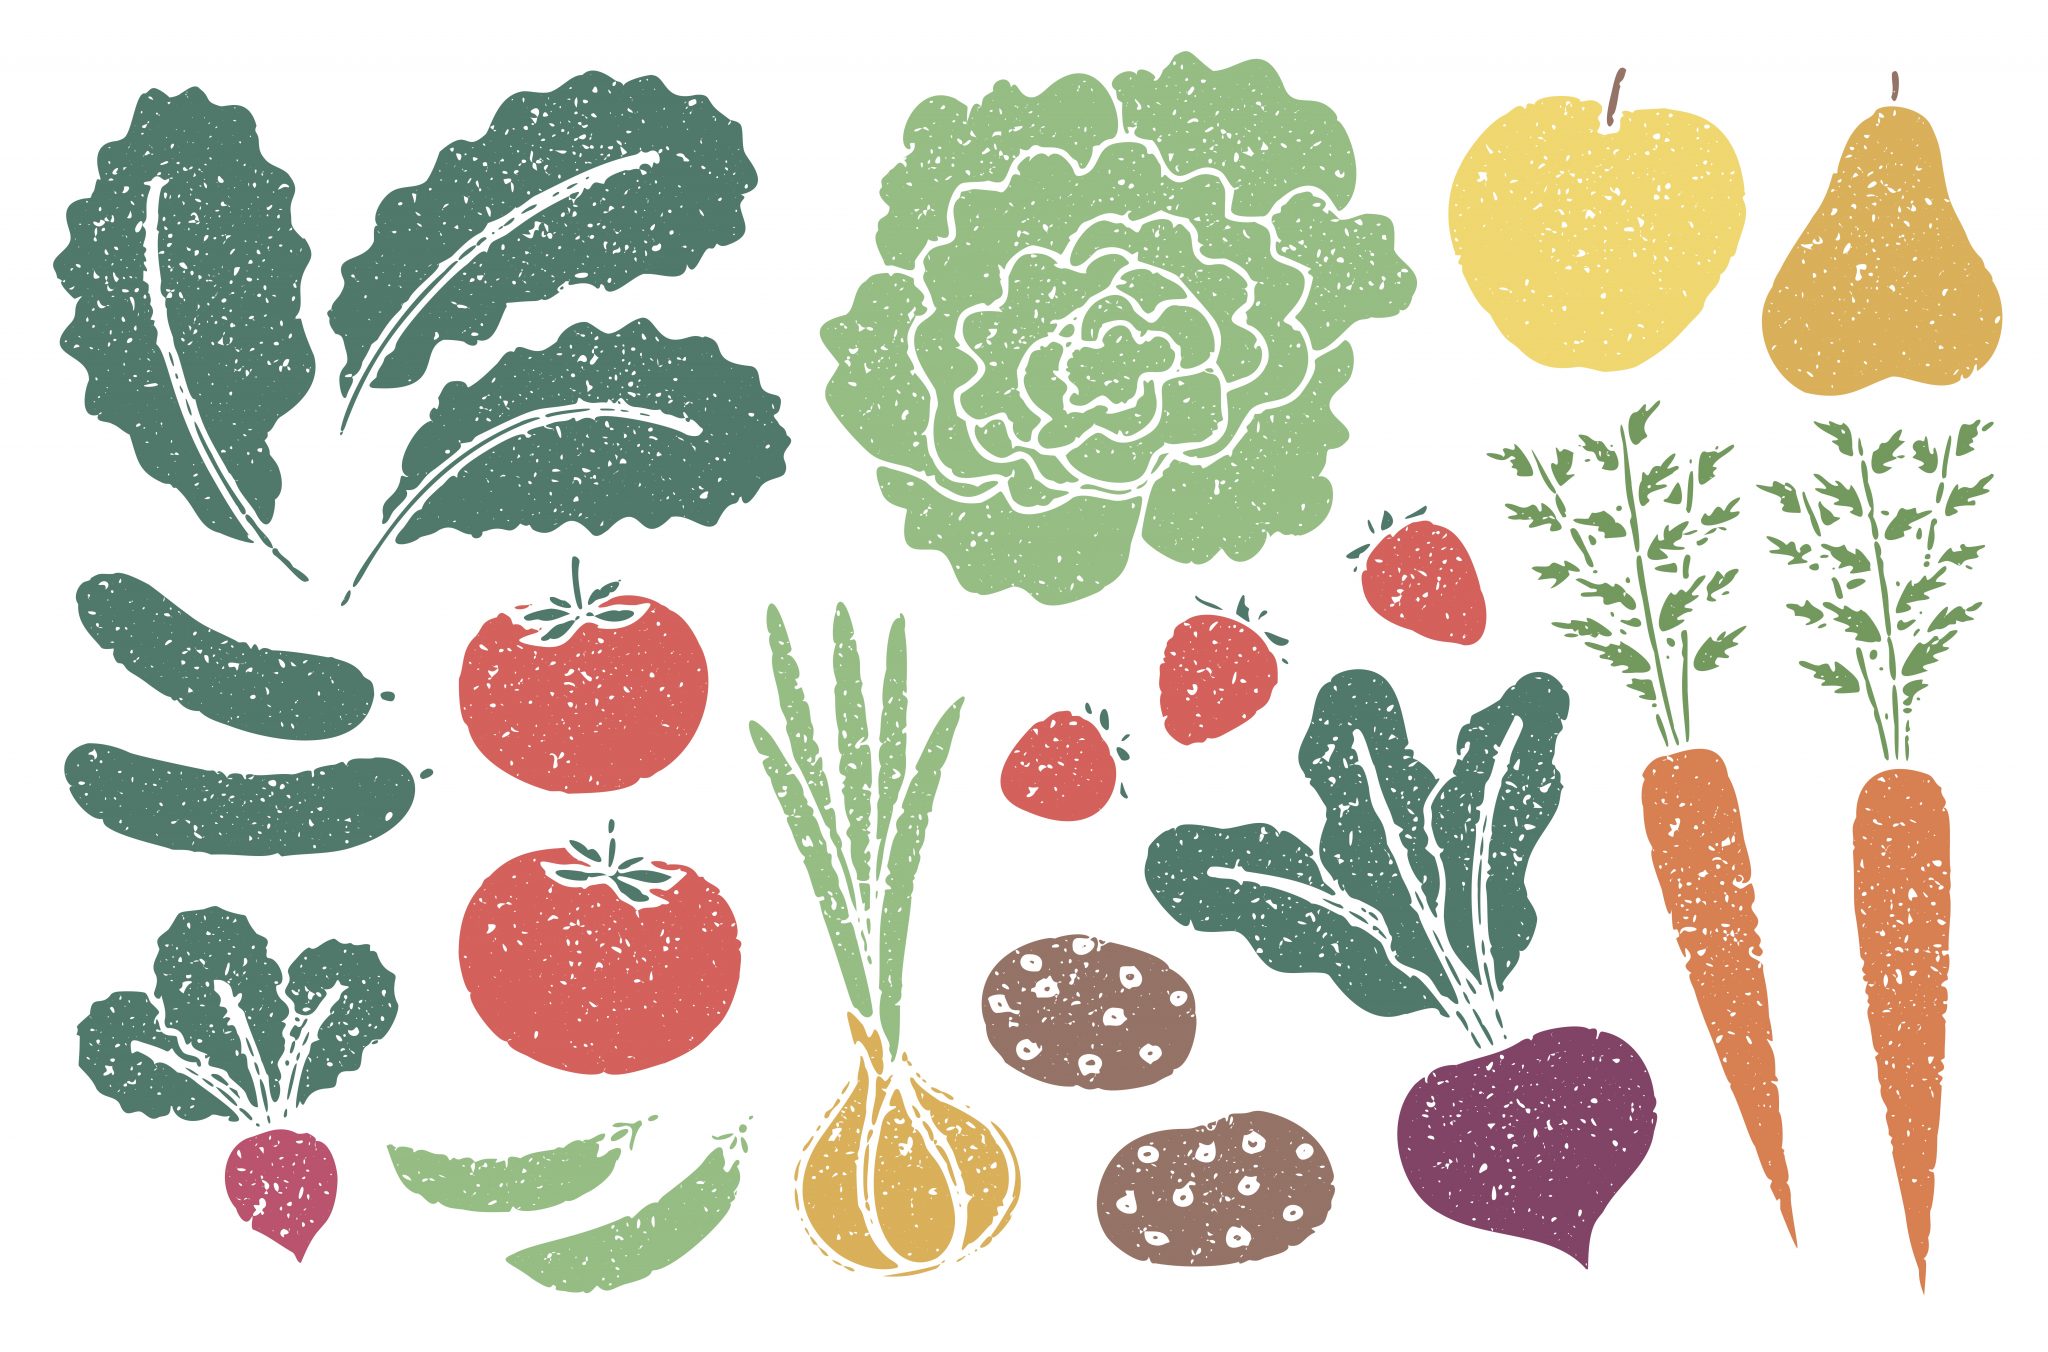 Illustrated fruits and vegetables